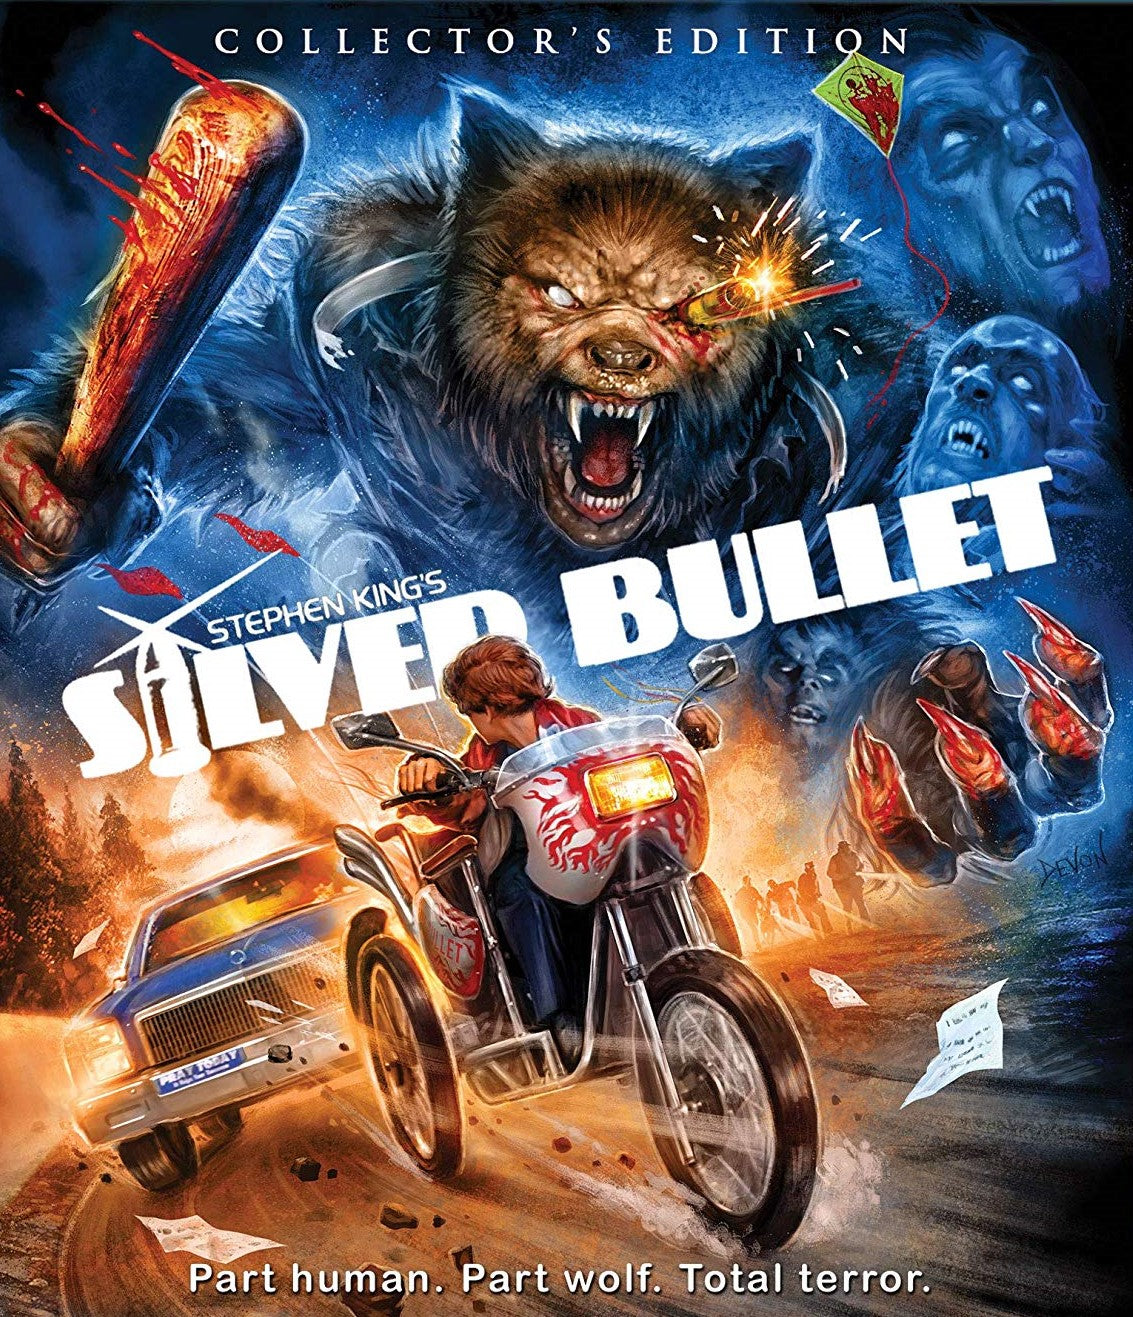 Silver Bullet (Collectors Edition) Blu-Ray Blu-Ray